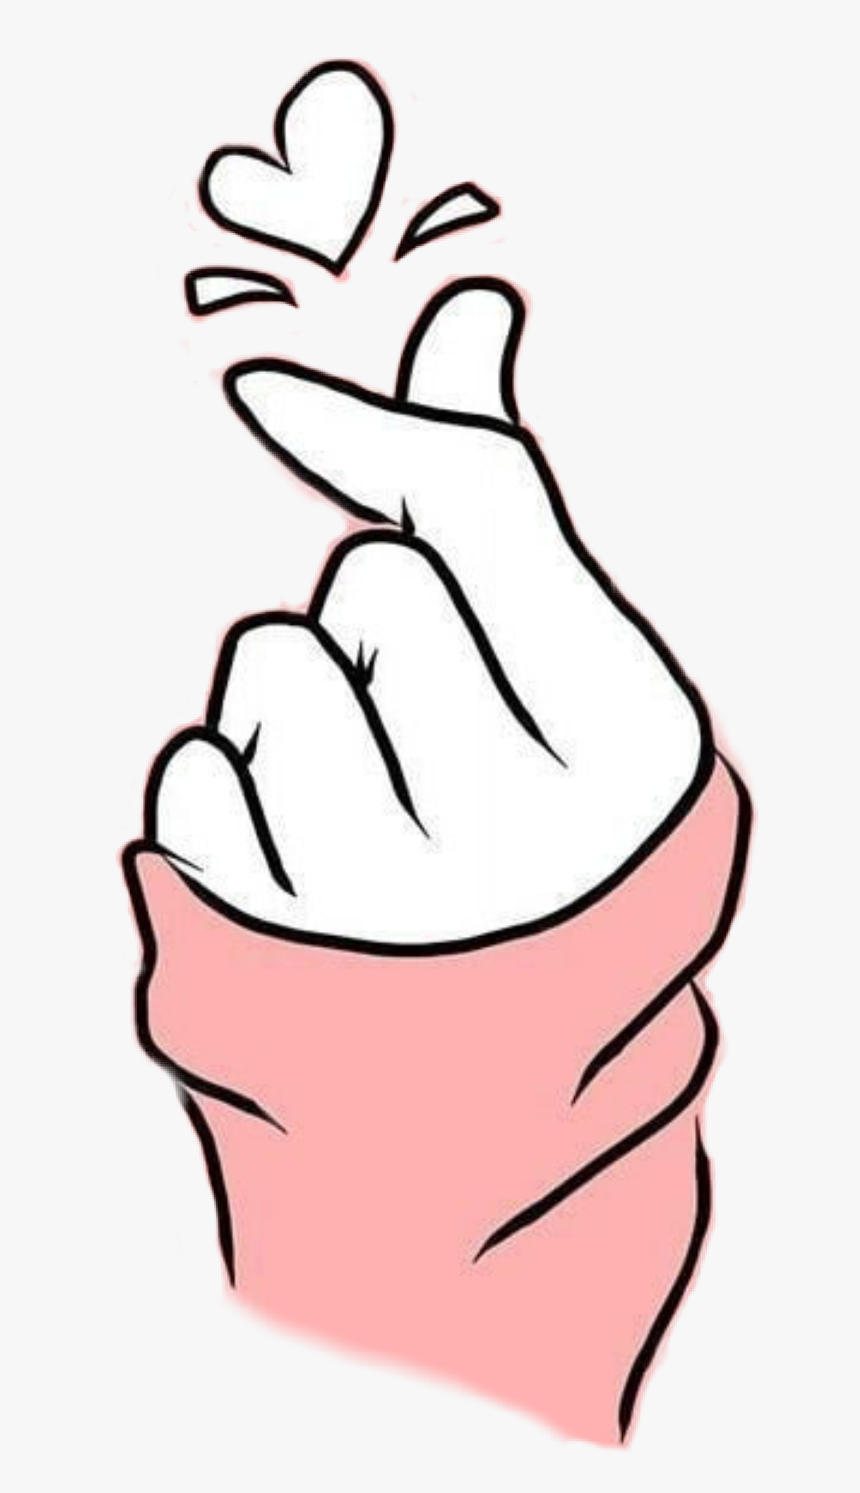 Cute drawing of a woman's hand doing the heart sign